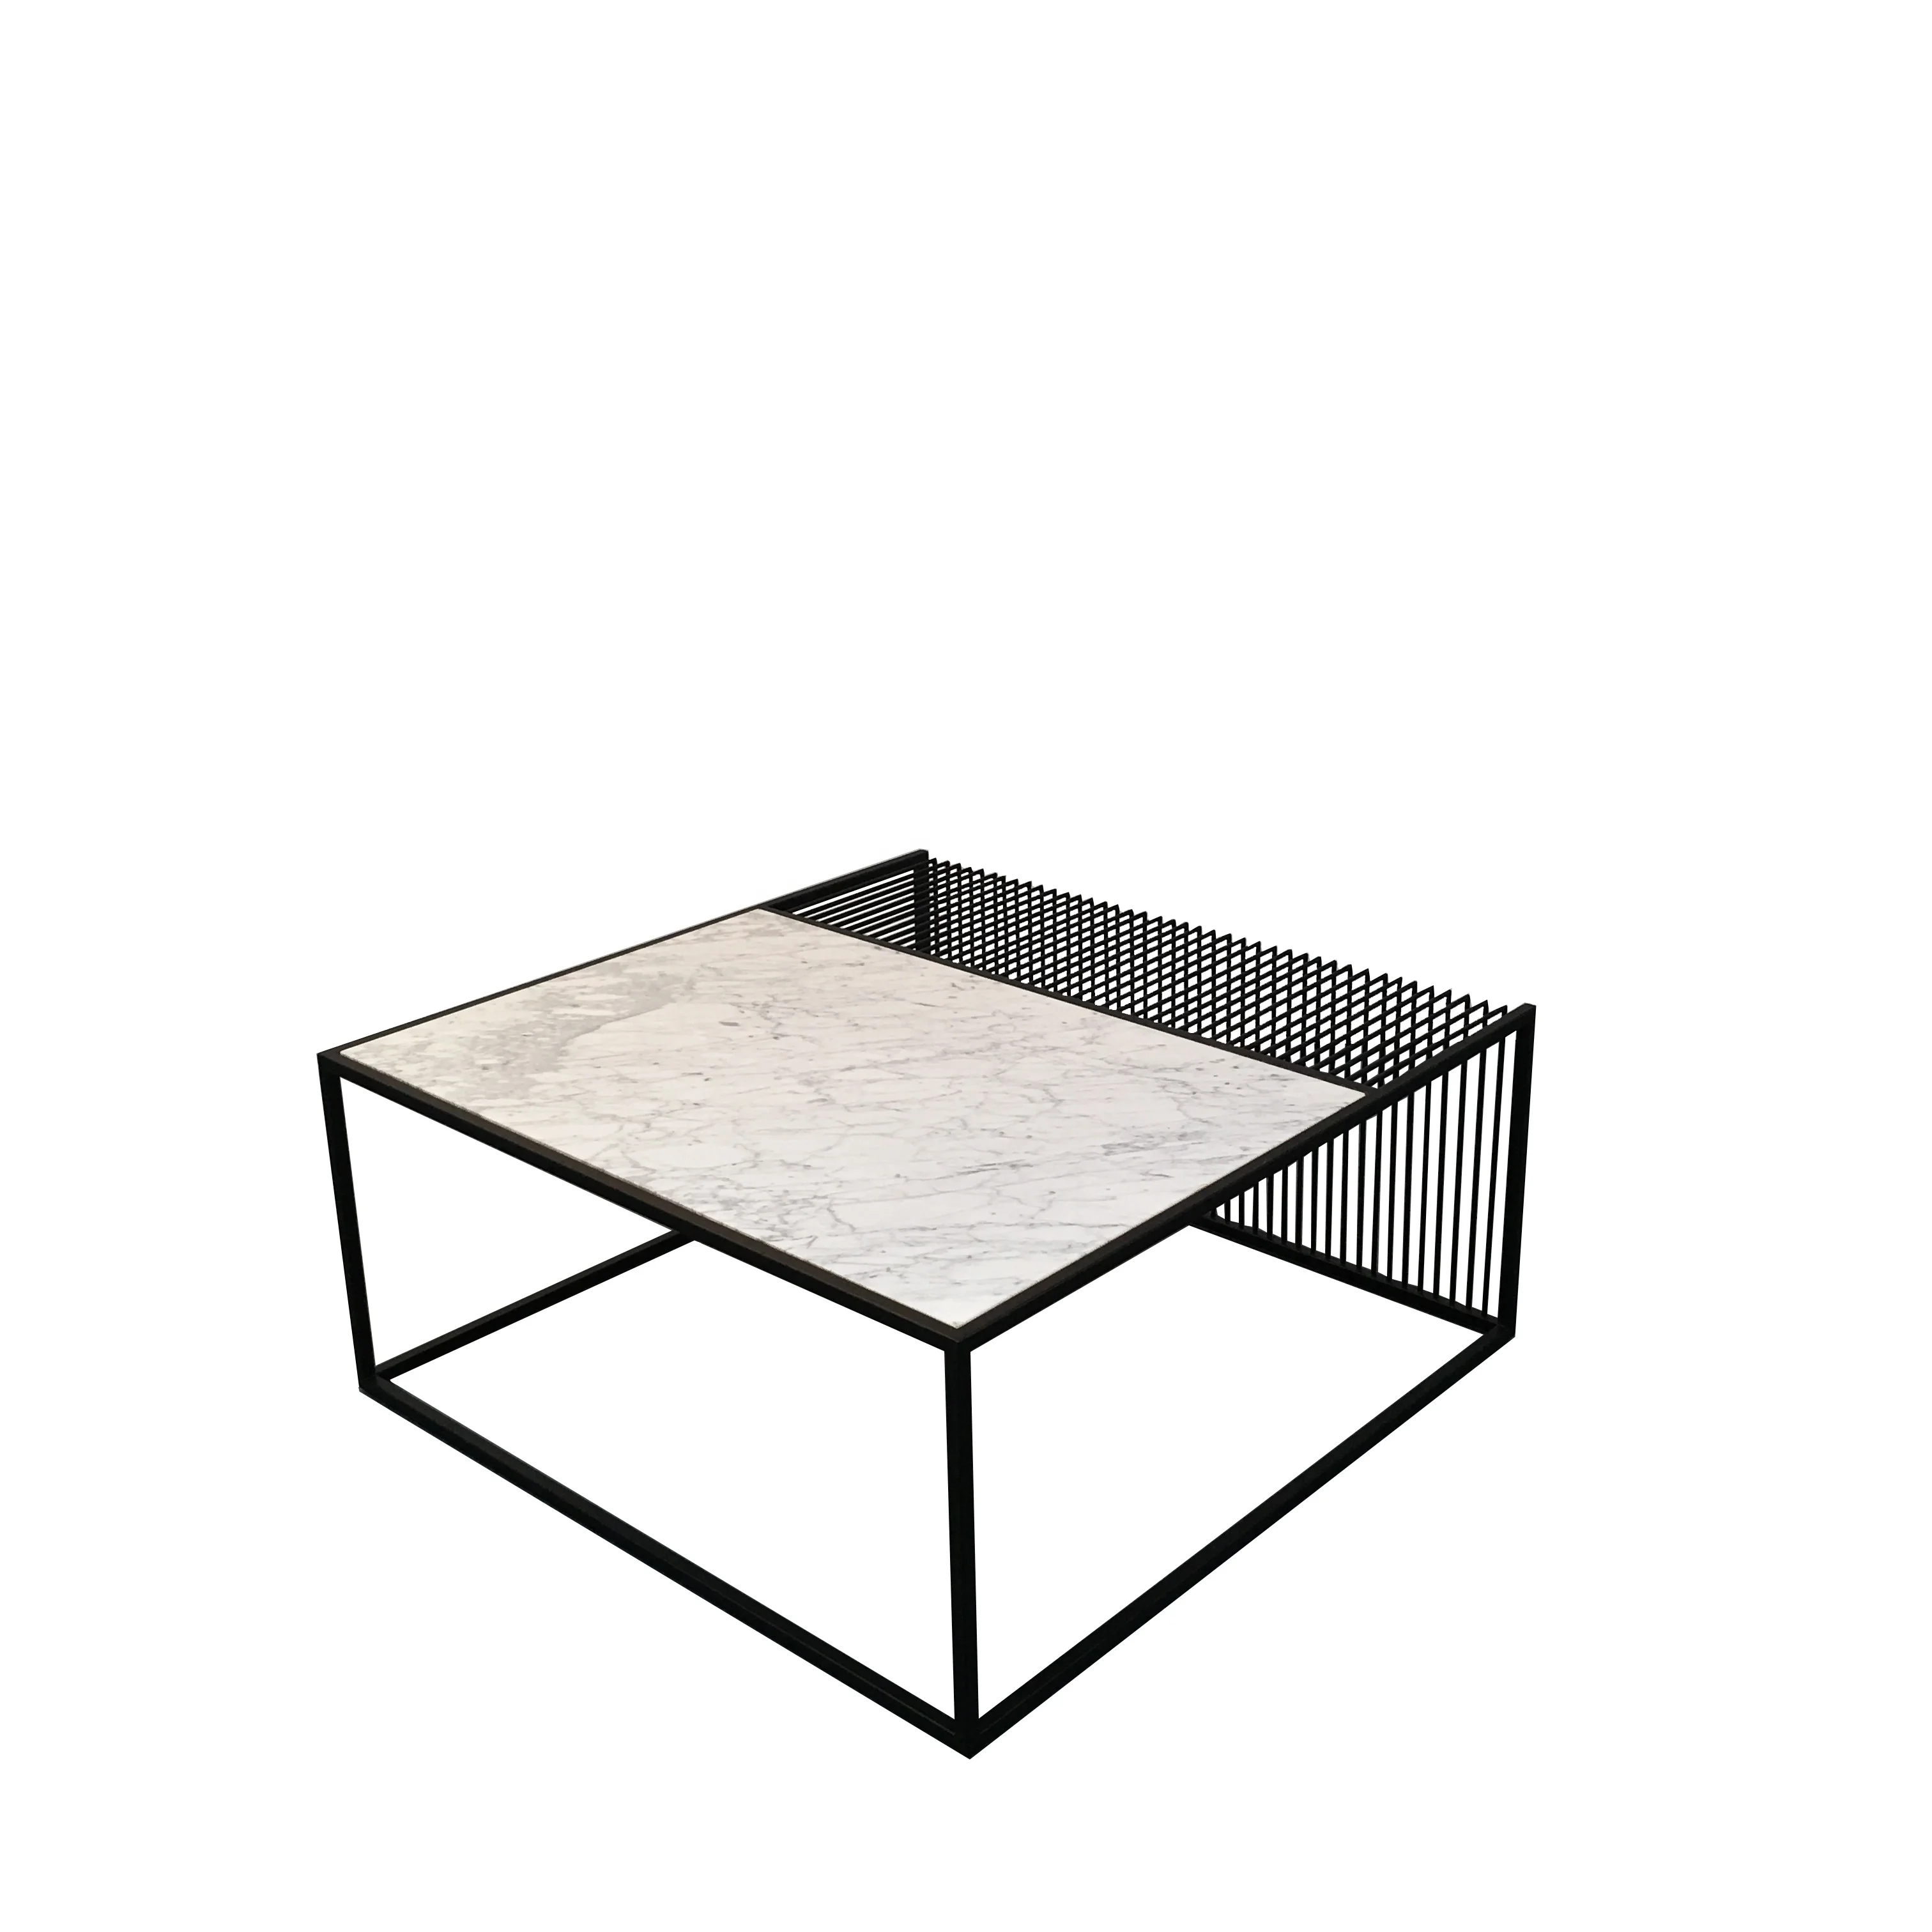 Marble coffee table for living room furniture